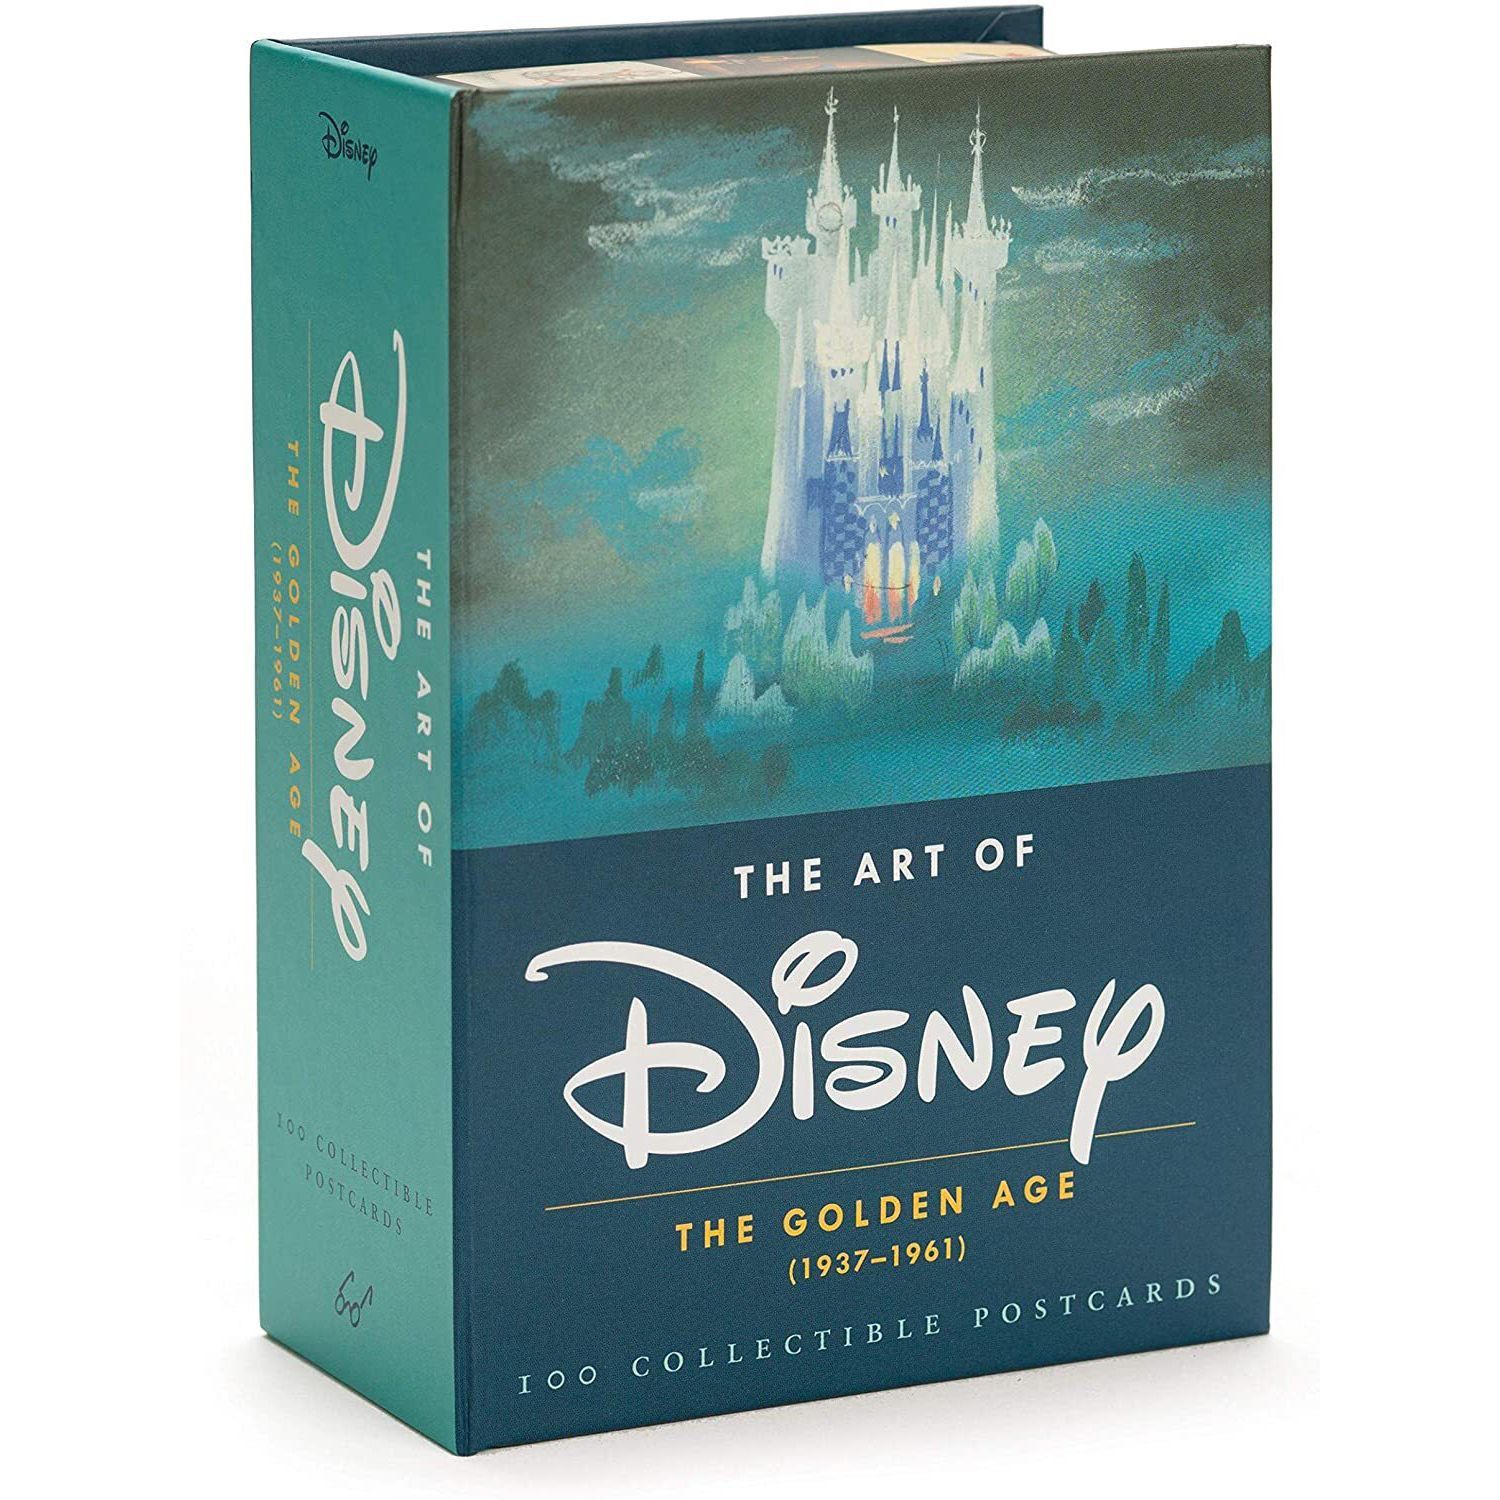 The Art of Disney: The Golden Age (1937-1961) Collectible Postcards